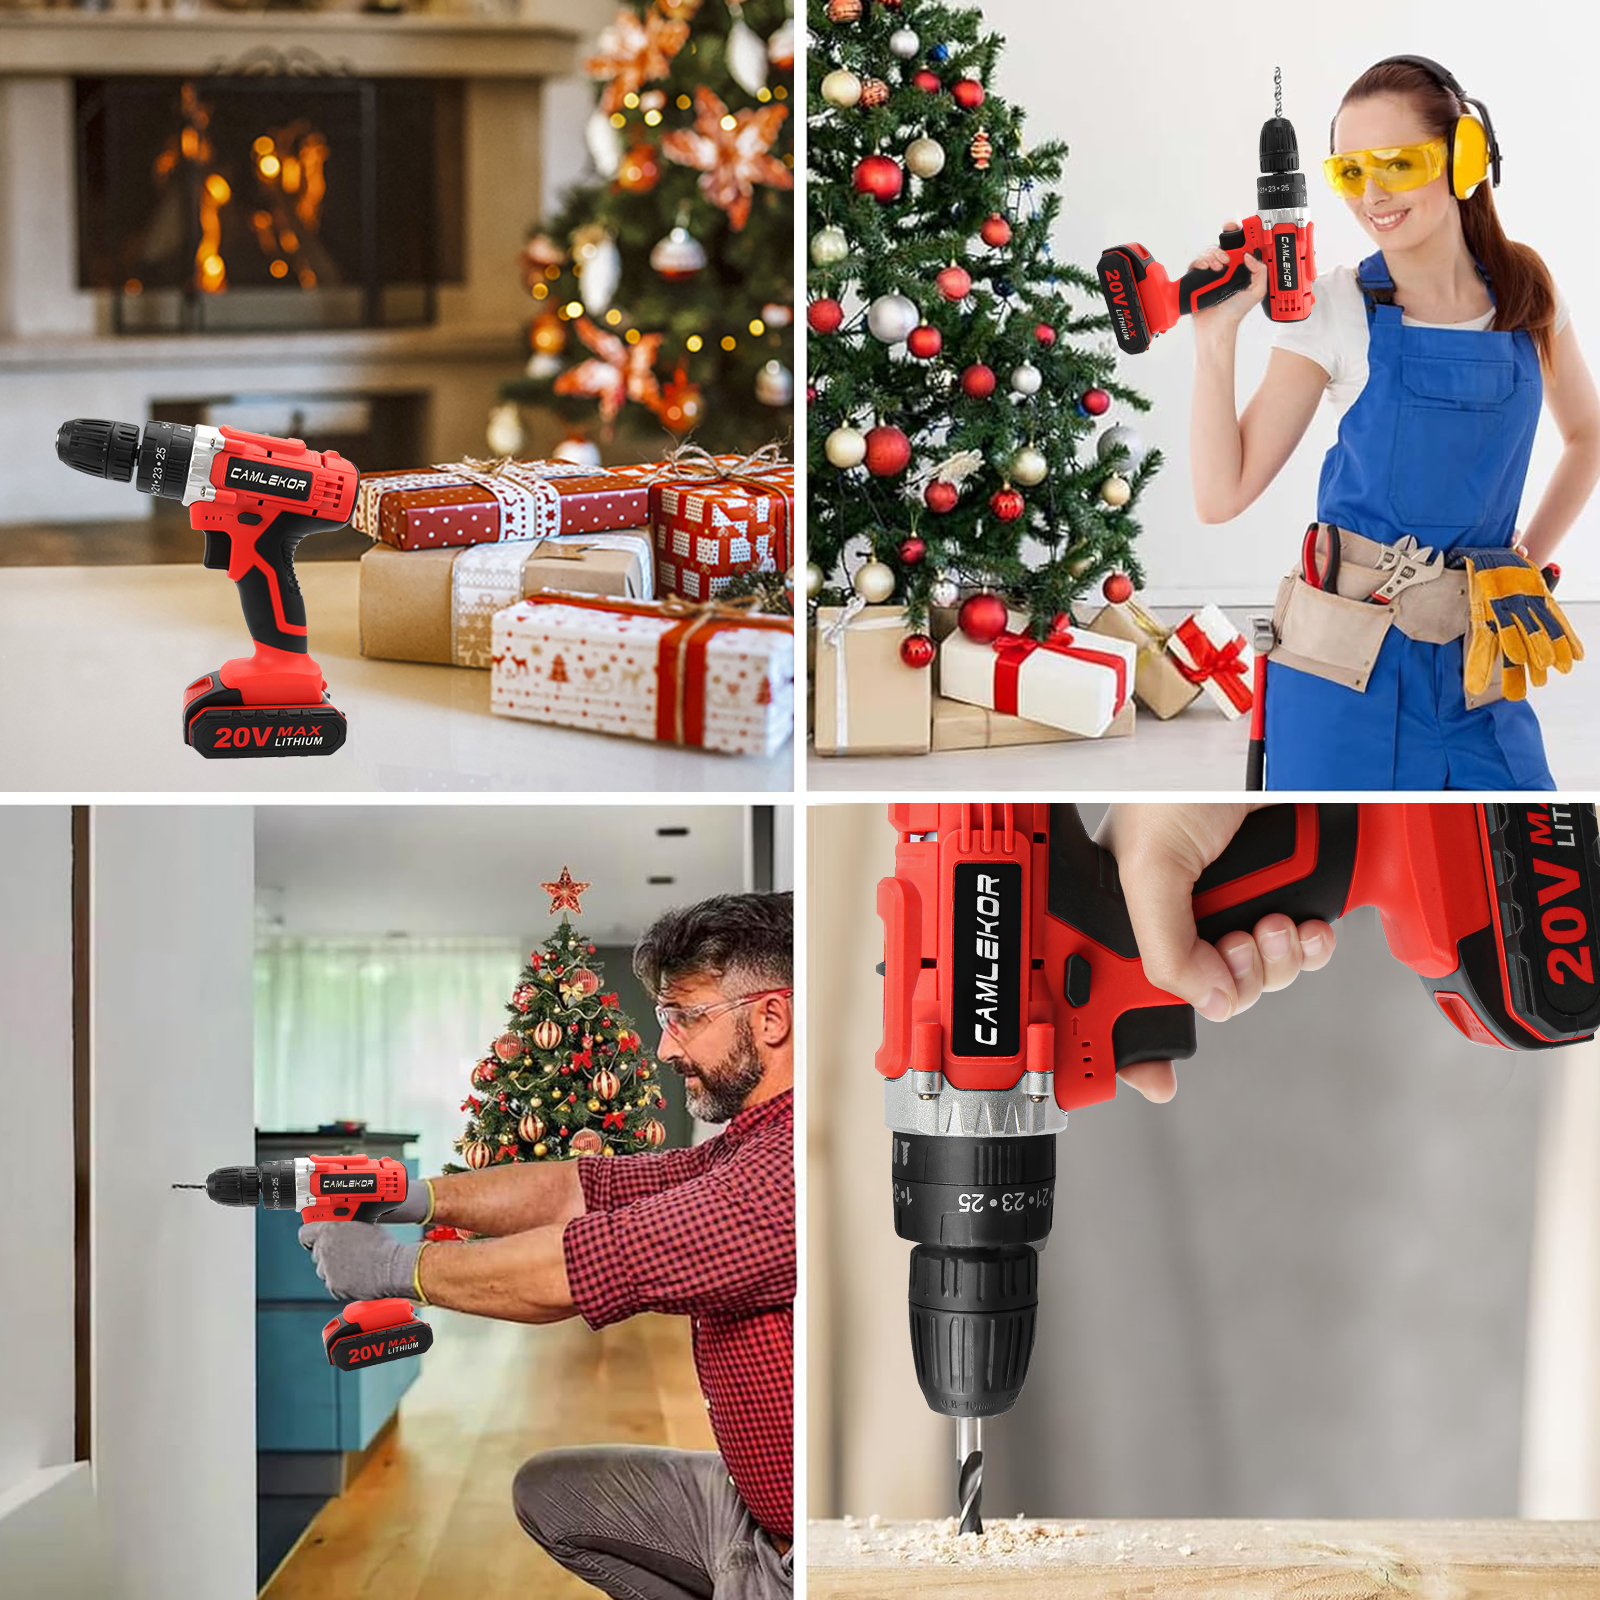 Camlekor Cordless Drill 20V, Electric Power Drill Set 3/8'' Impact Drill, 2 Variable Speeds & 25+3 Position Setting with LED Work Light - image 3 of 8